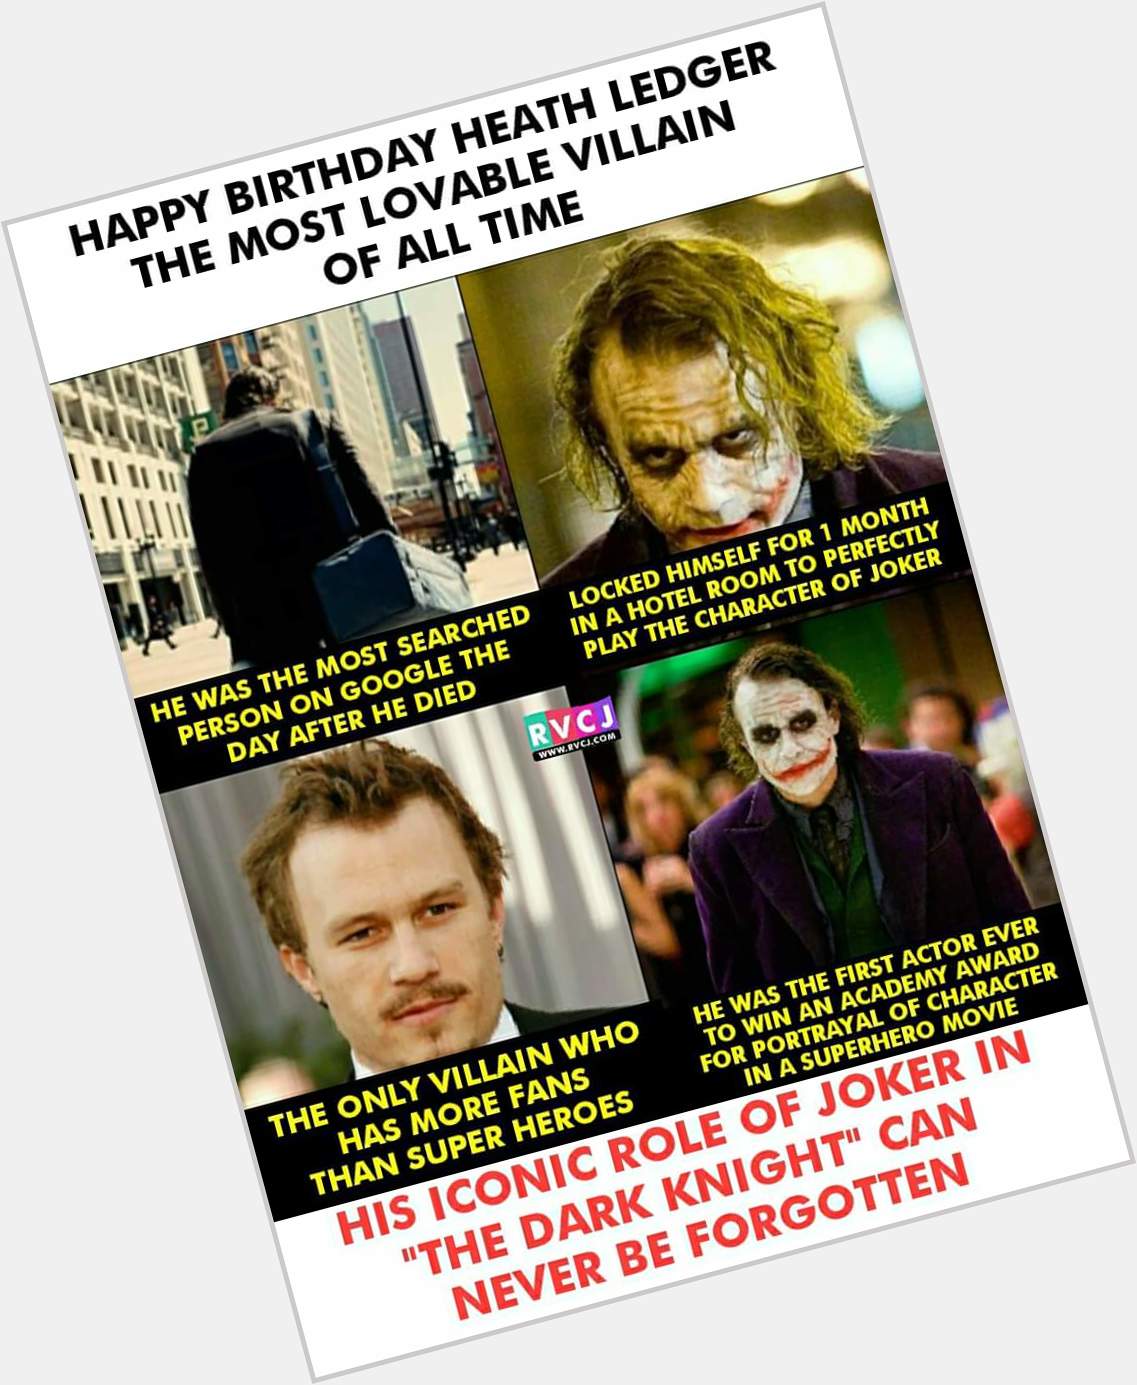 Happy Birthday Legend Heath Ledger... You Are More Popular Than The Any Other Superhero... RIP Brother. 